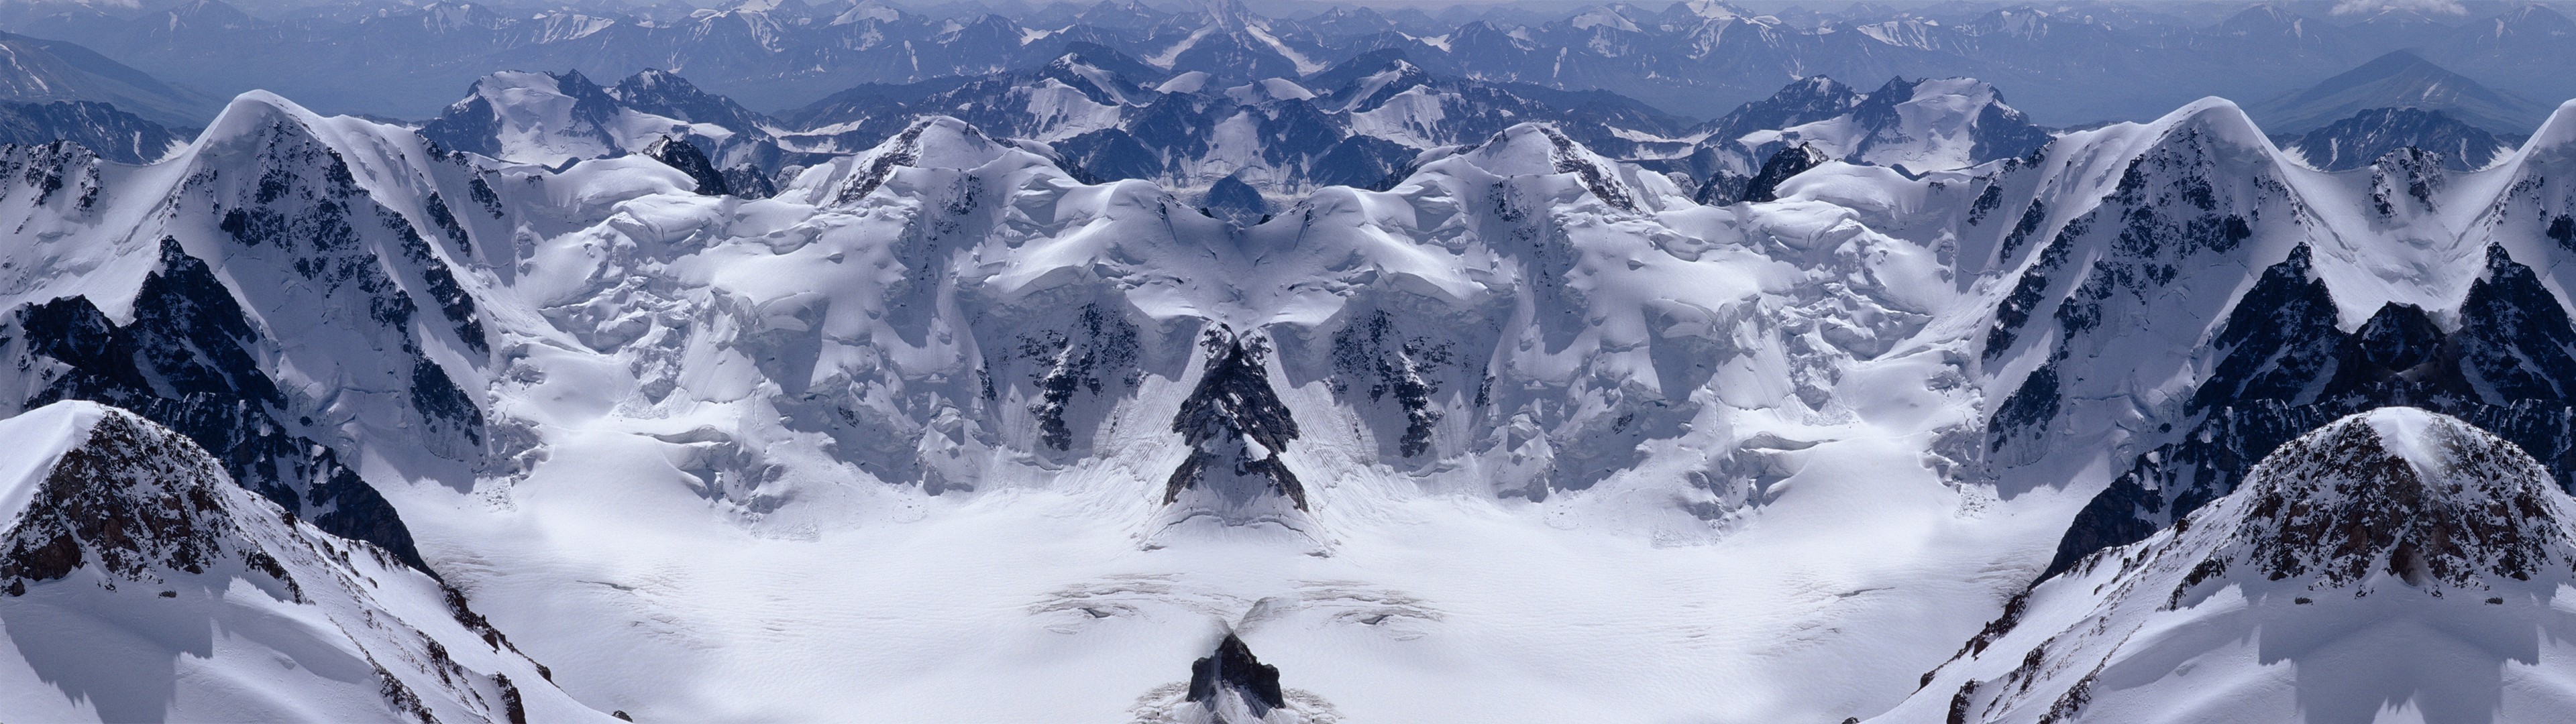 General 3840x1080 mountains snow mirrored nature